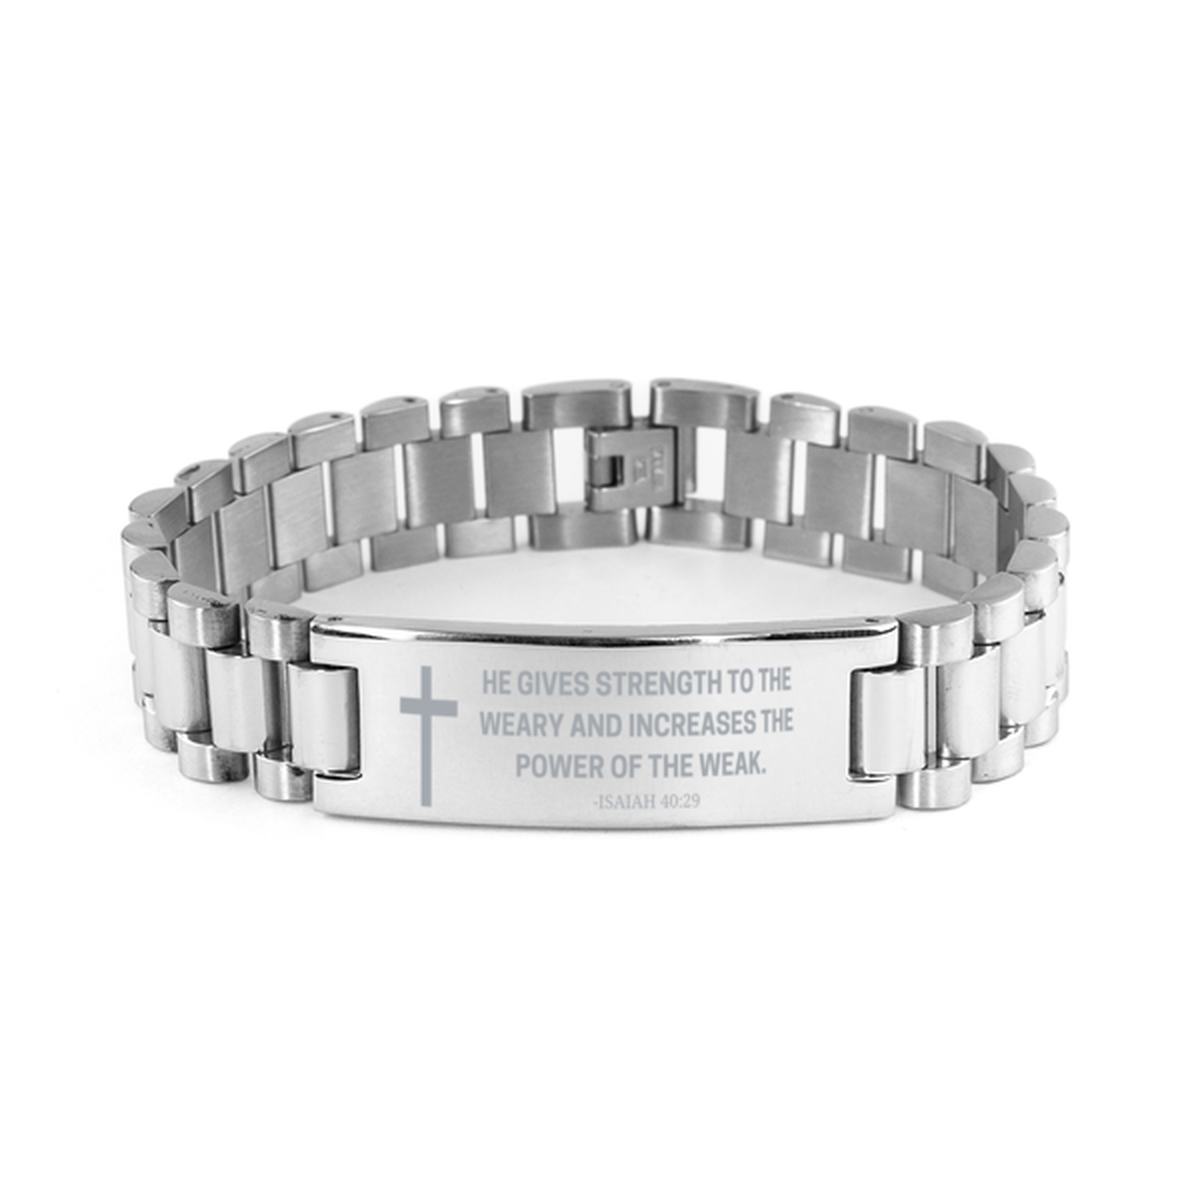 Baptism Gifts For Teenage Boys Girls, Christian Bible Verse Ladder Stainless Steel Bracelet, He gives strength to the weary, Catholic Confirmation Gifts for Son, Godson, Grandson, Nephew